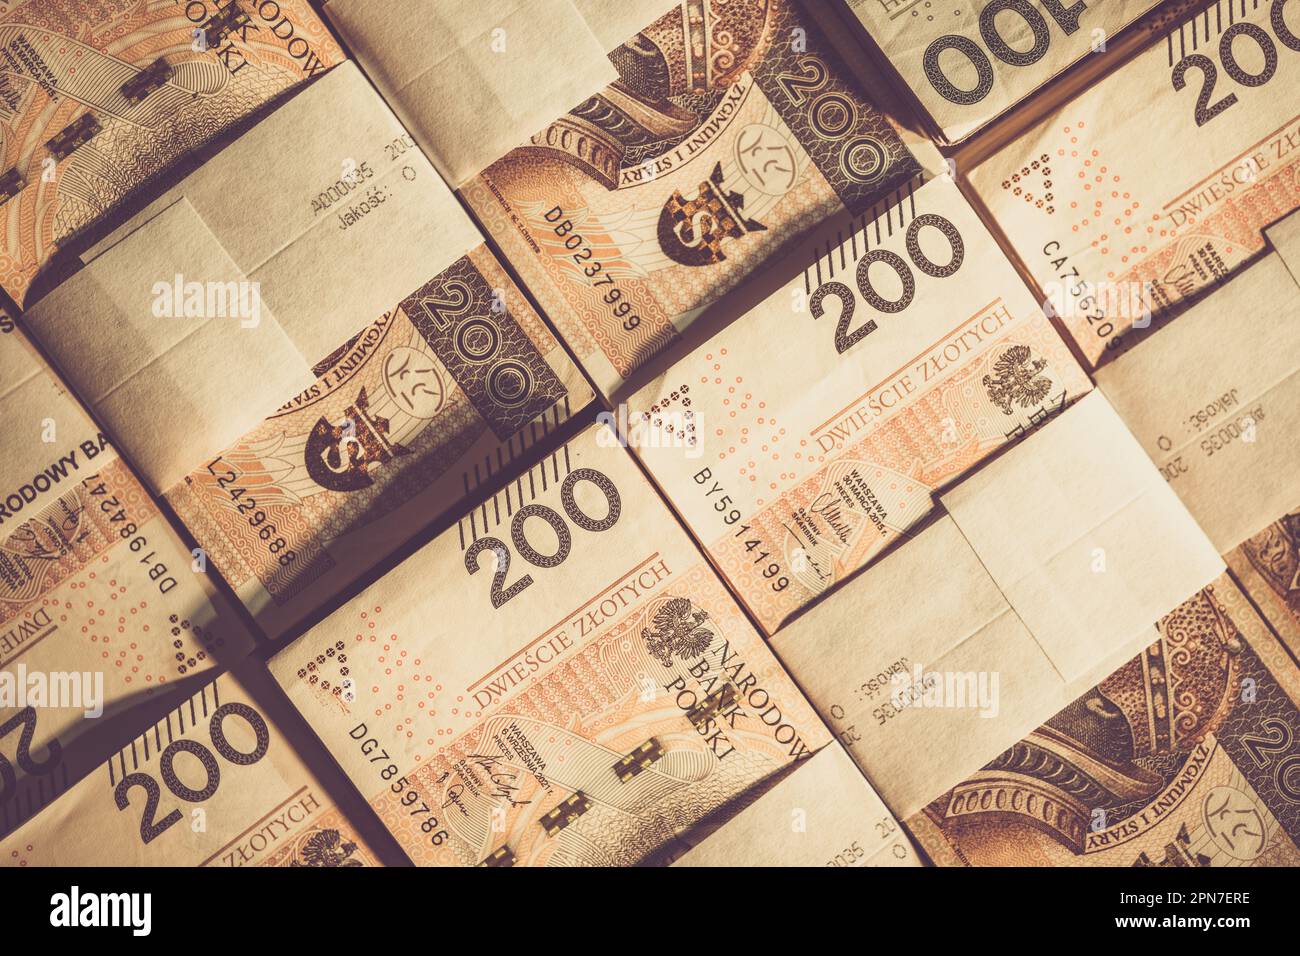 Two Hundred Polish Zloty Bills Counted and Tied Together with Currency Strap. Top View of Cash Money Bundle. Business and Financial Theme. Stock Photo